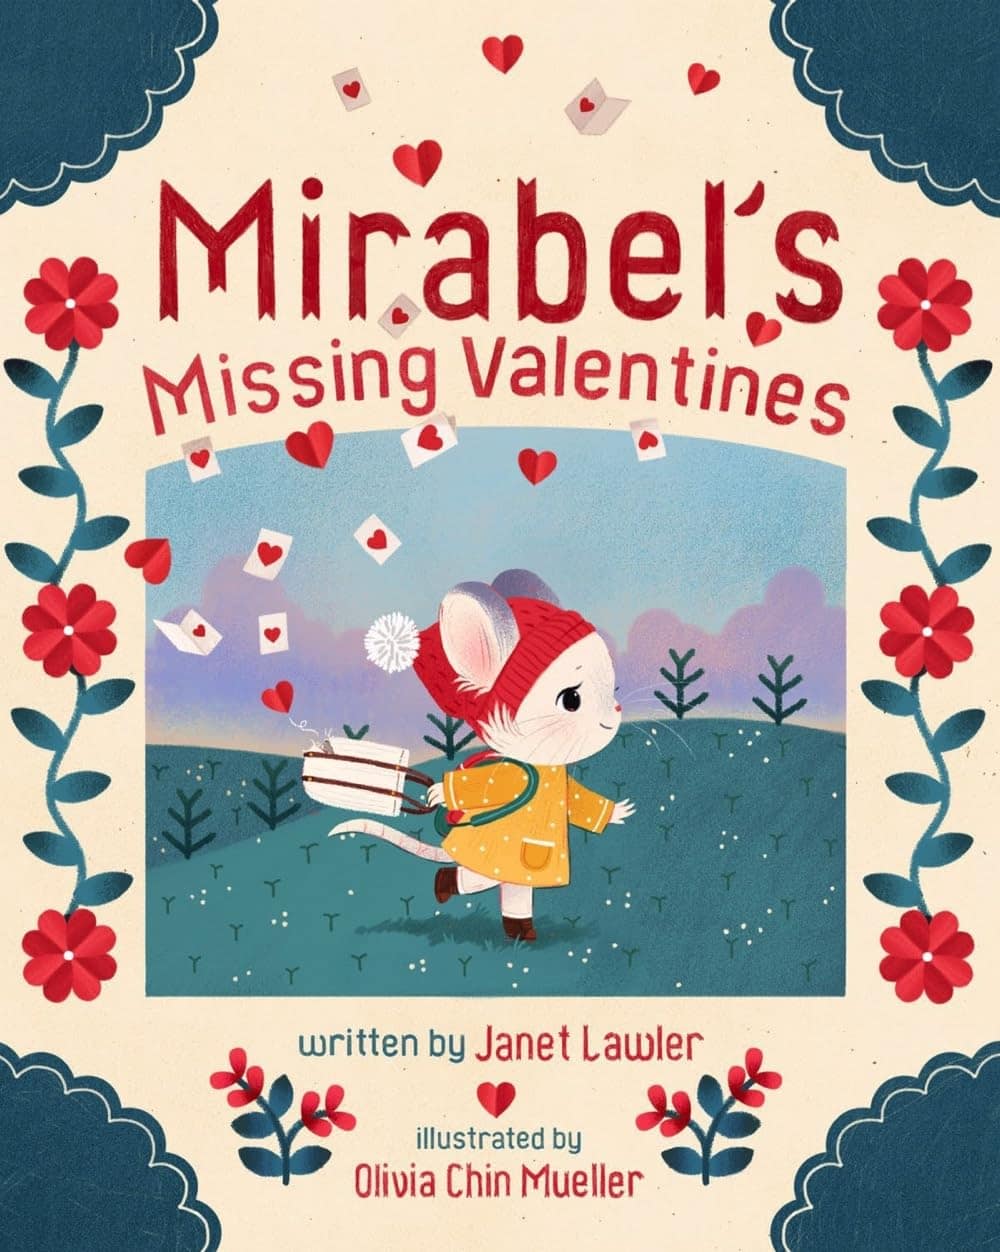 “Mirabel’s Missing Valentines” by Janet Lawler